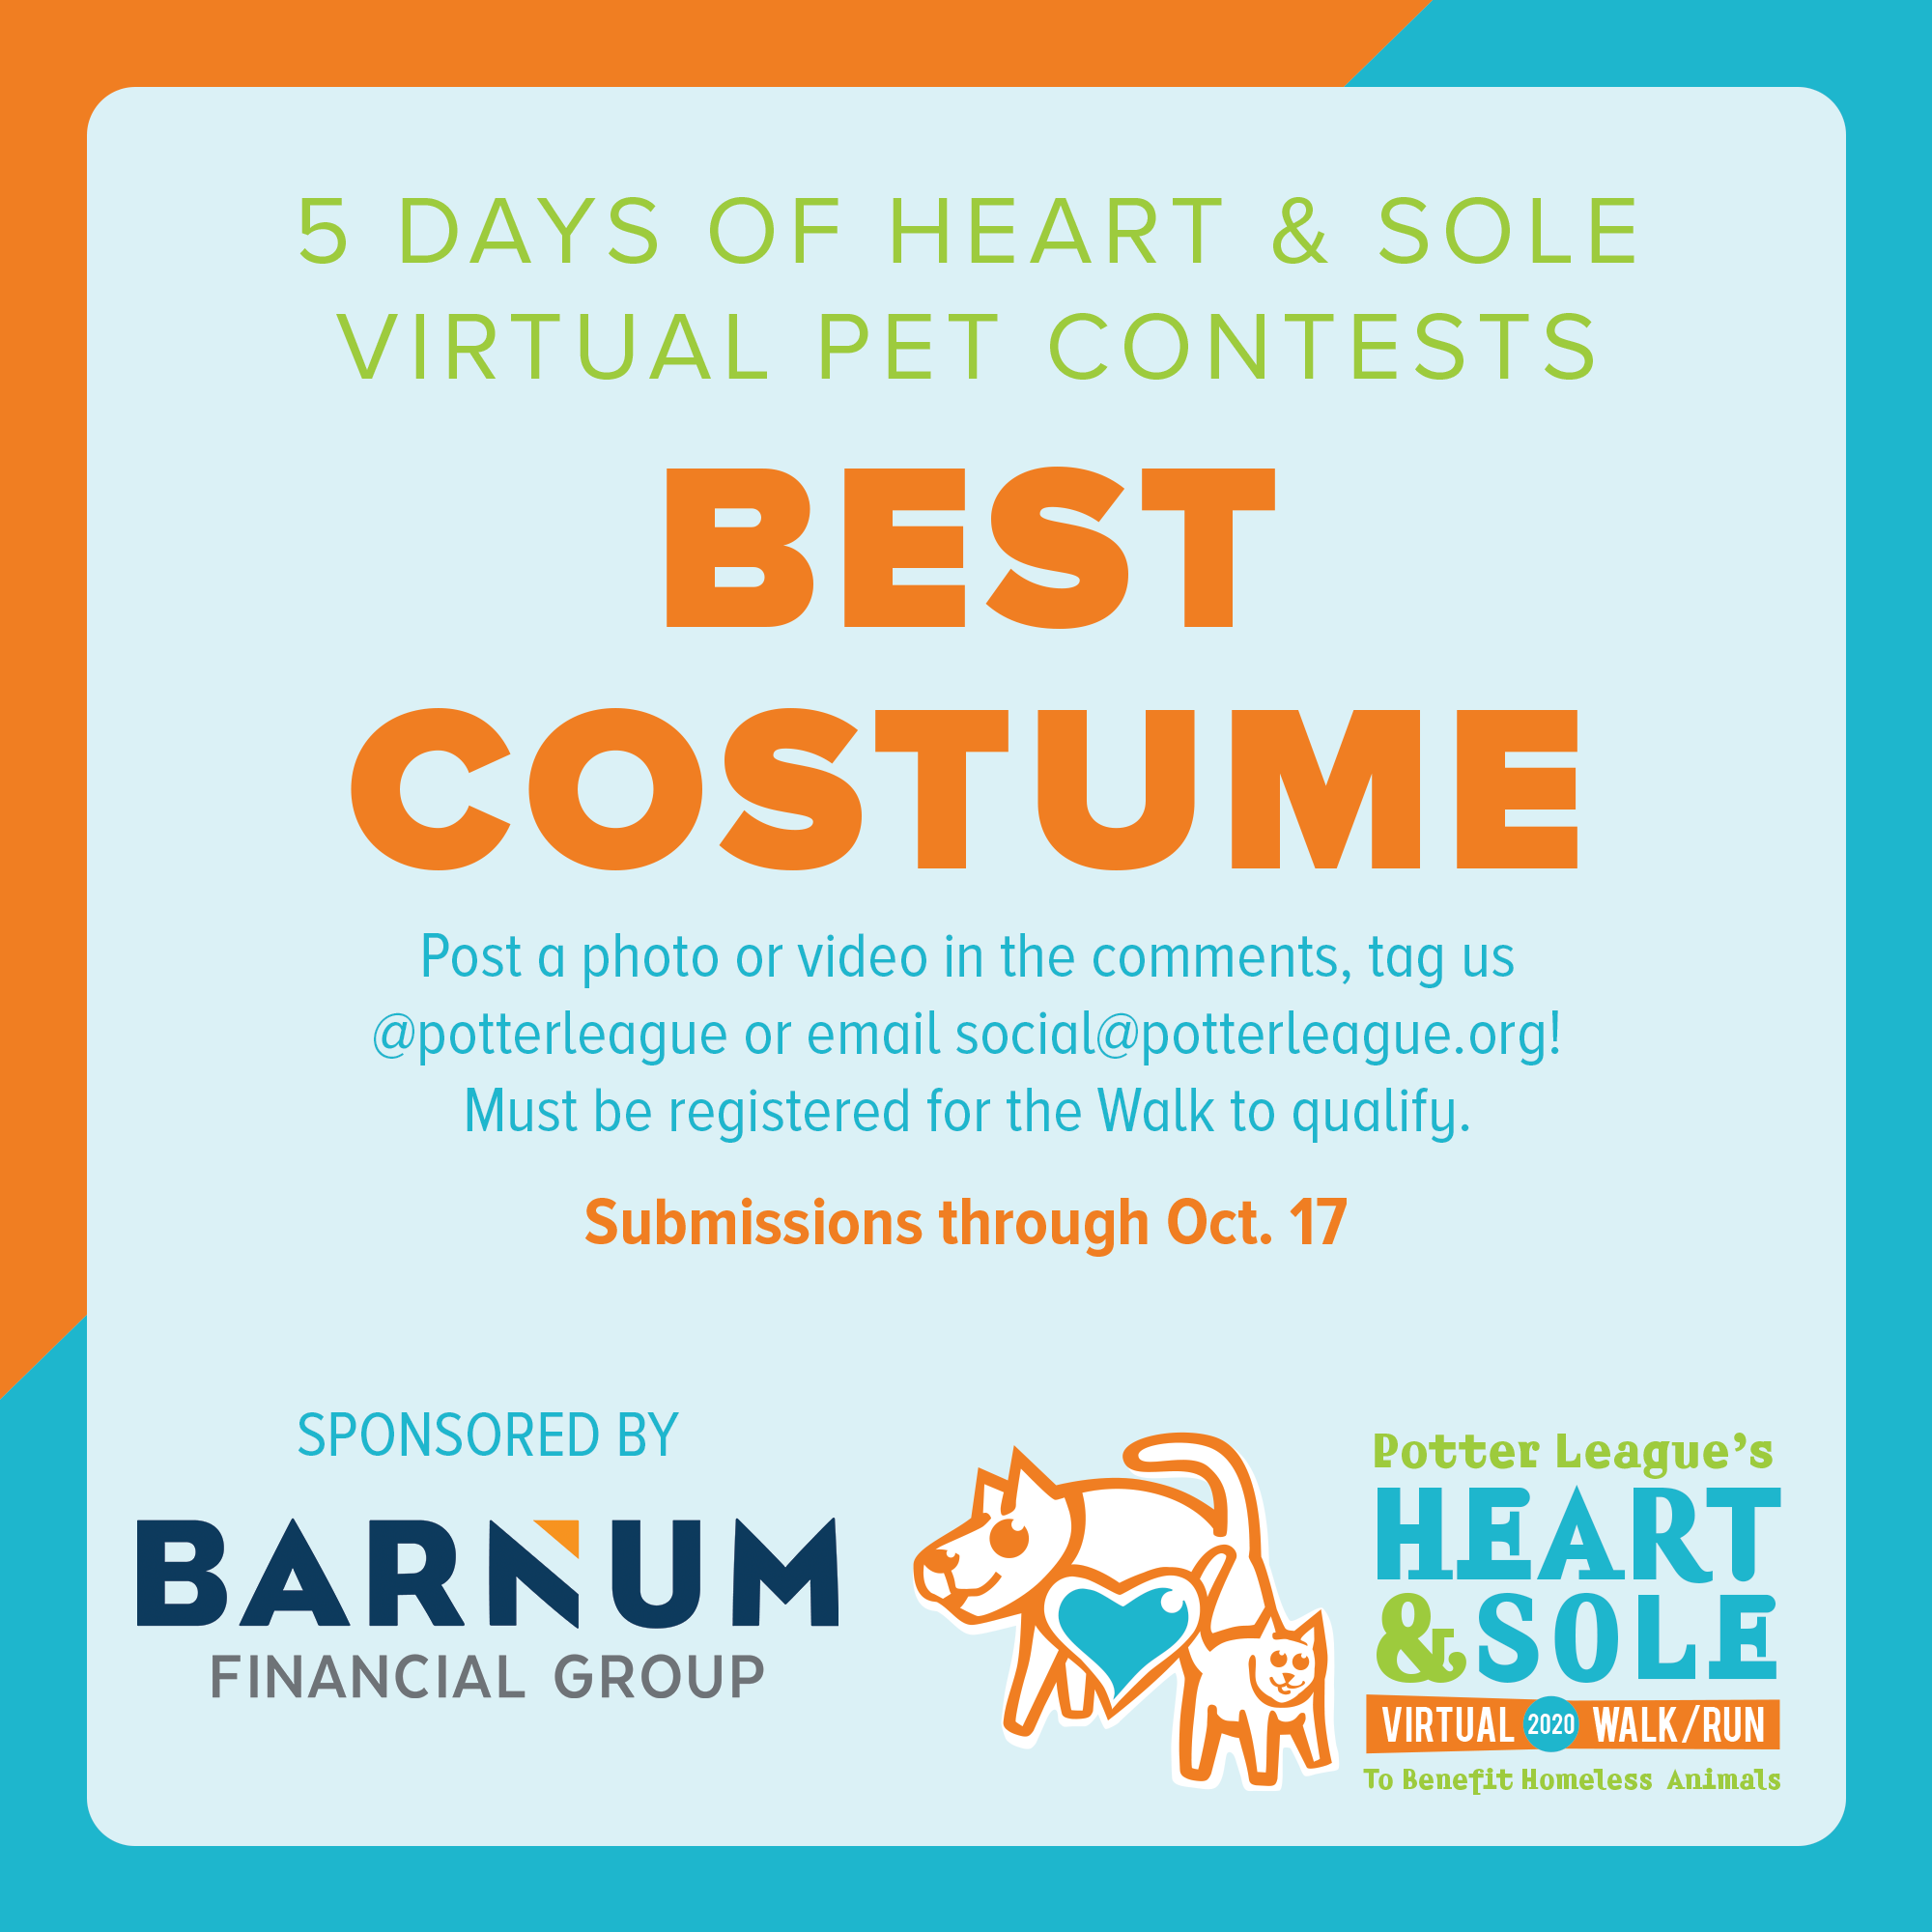 HAS-PetContests-costume.png